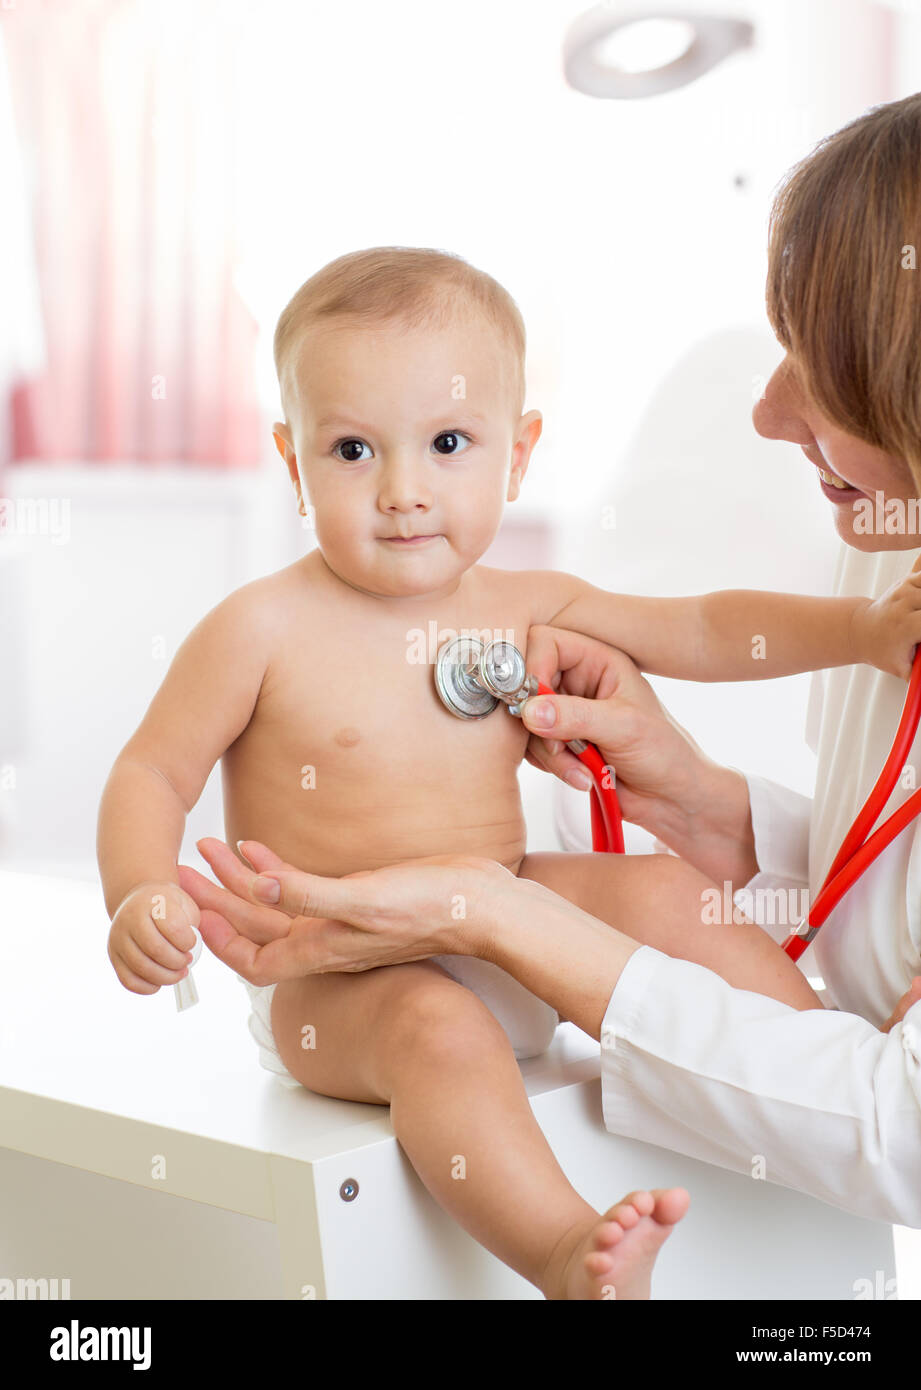 pediatrician doctor with quiet baby in medical room Stock Photo